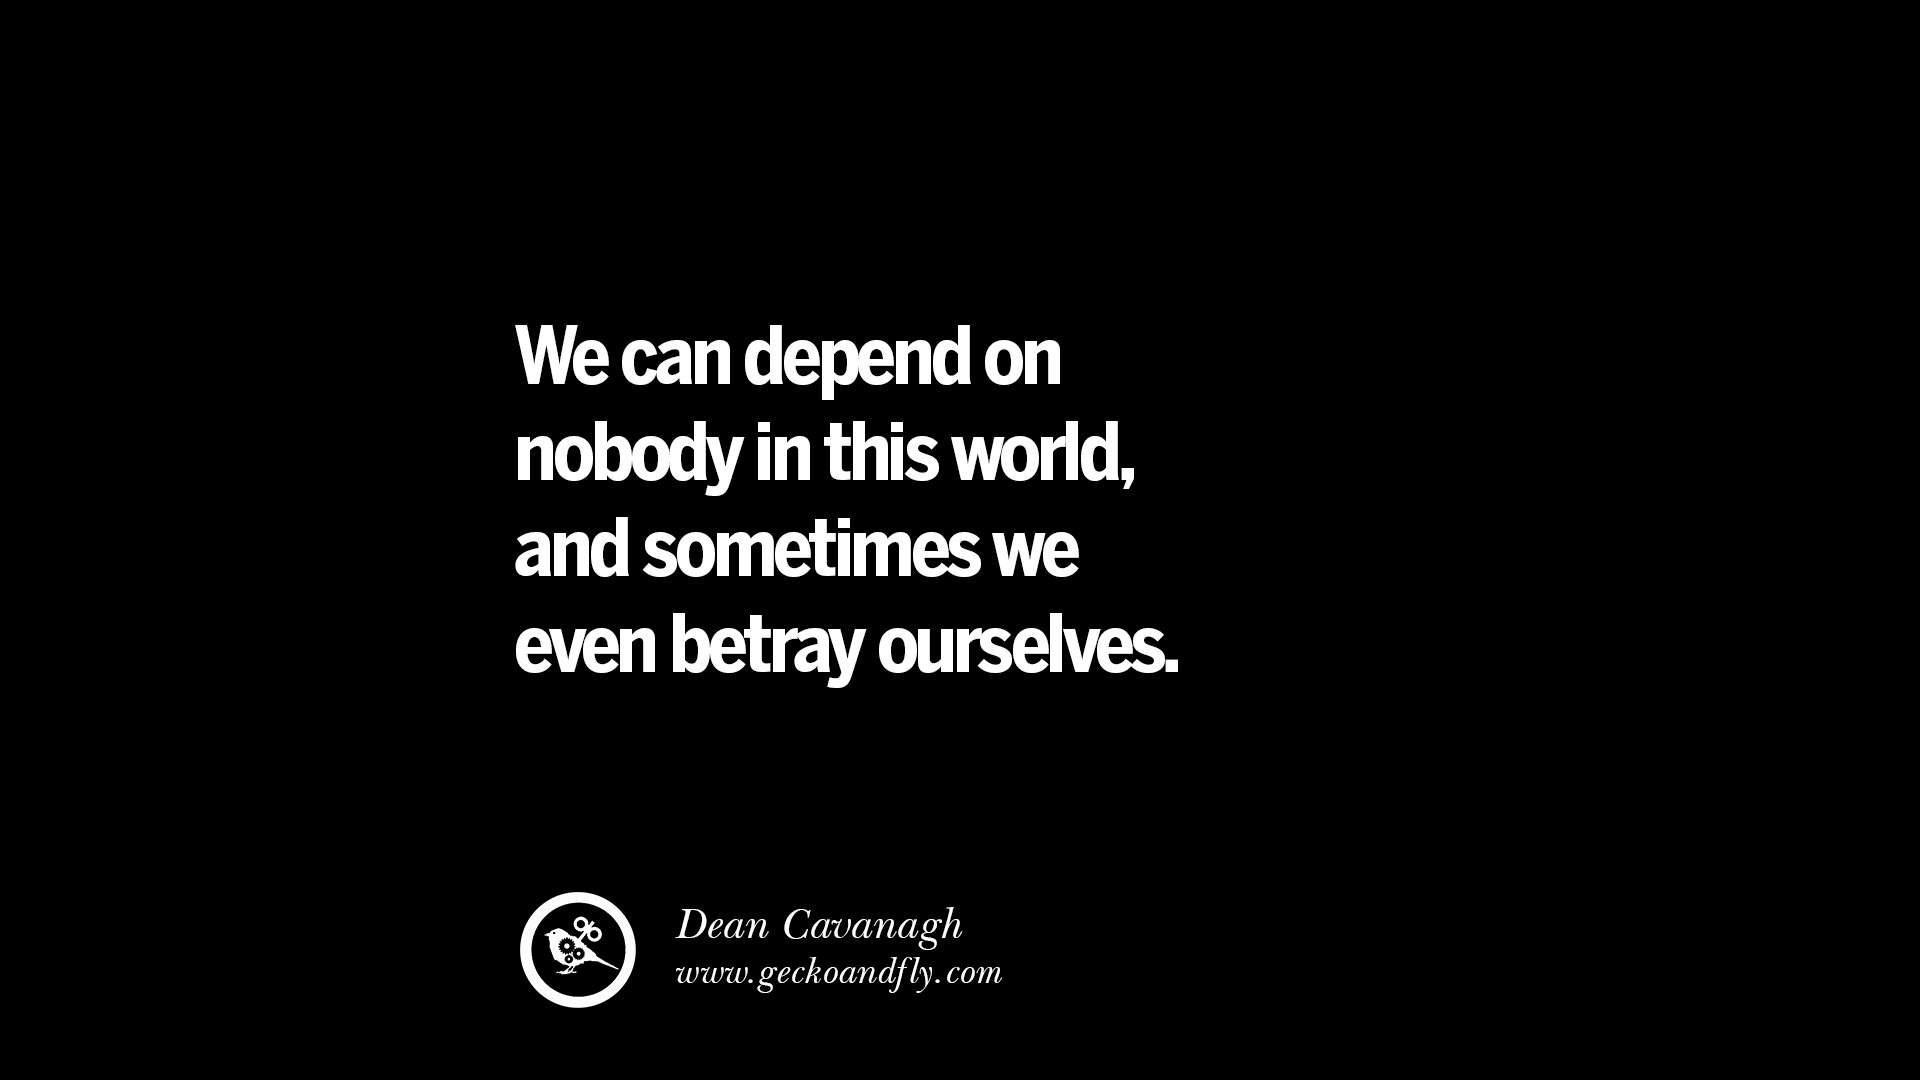 We can depend on nobody in this world and sometimes we even betray ourselves